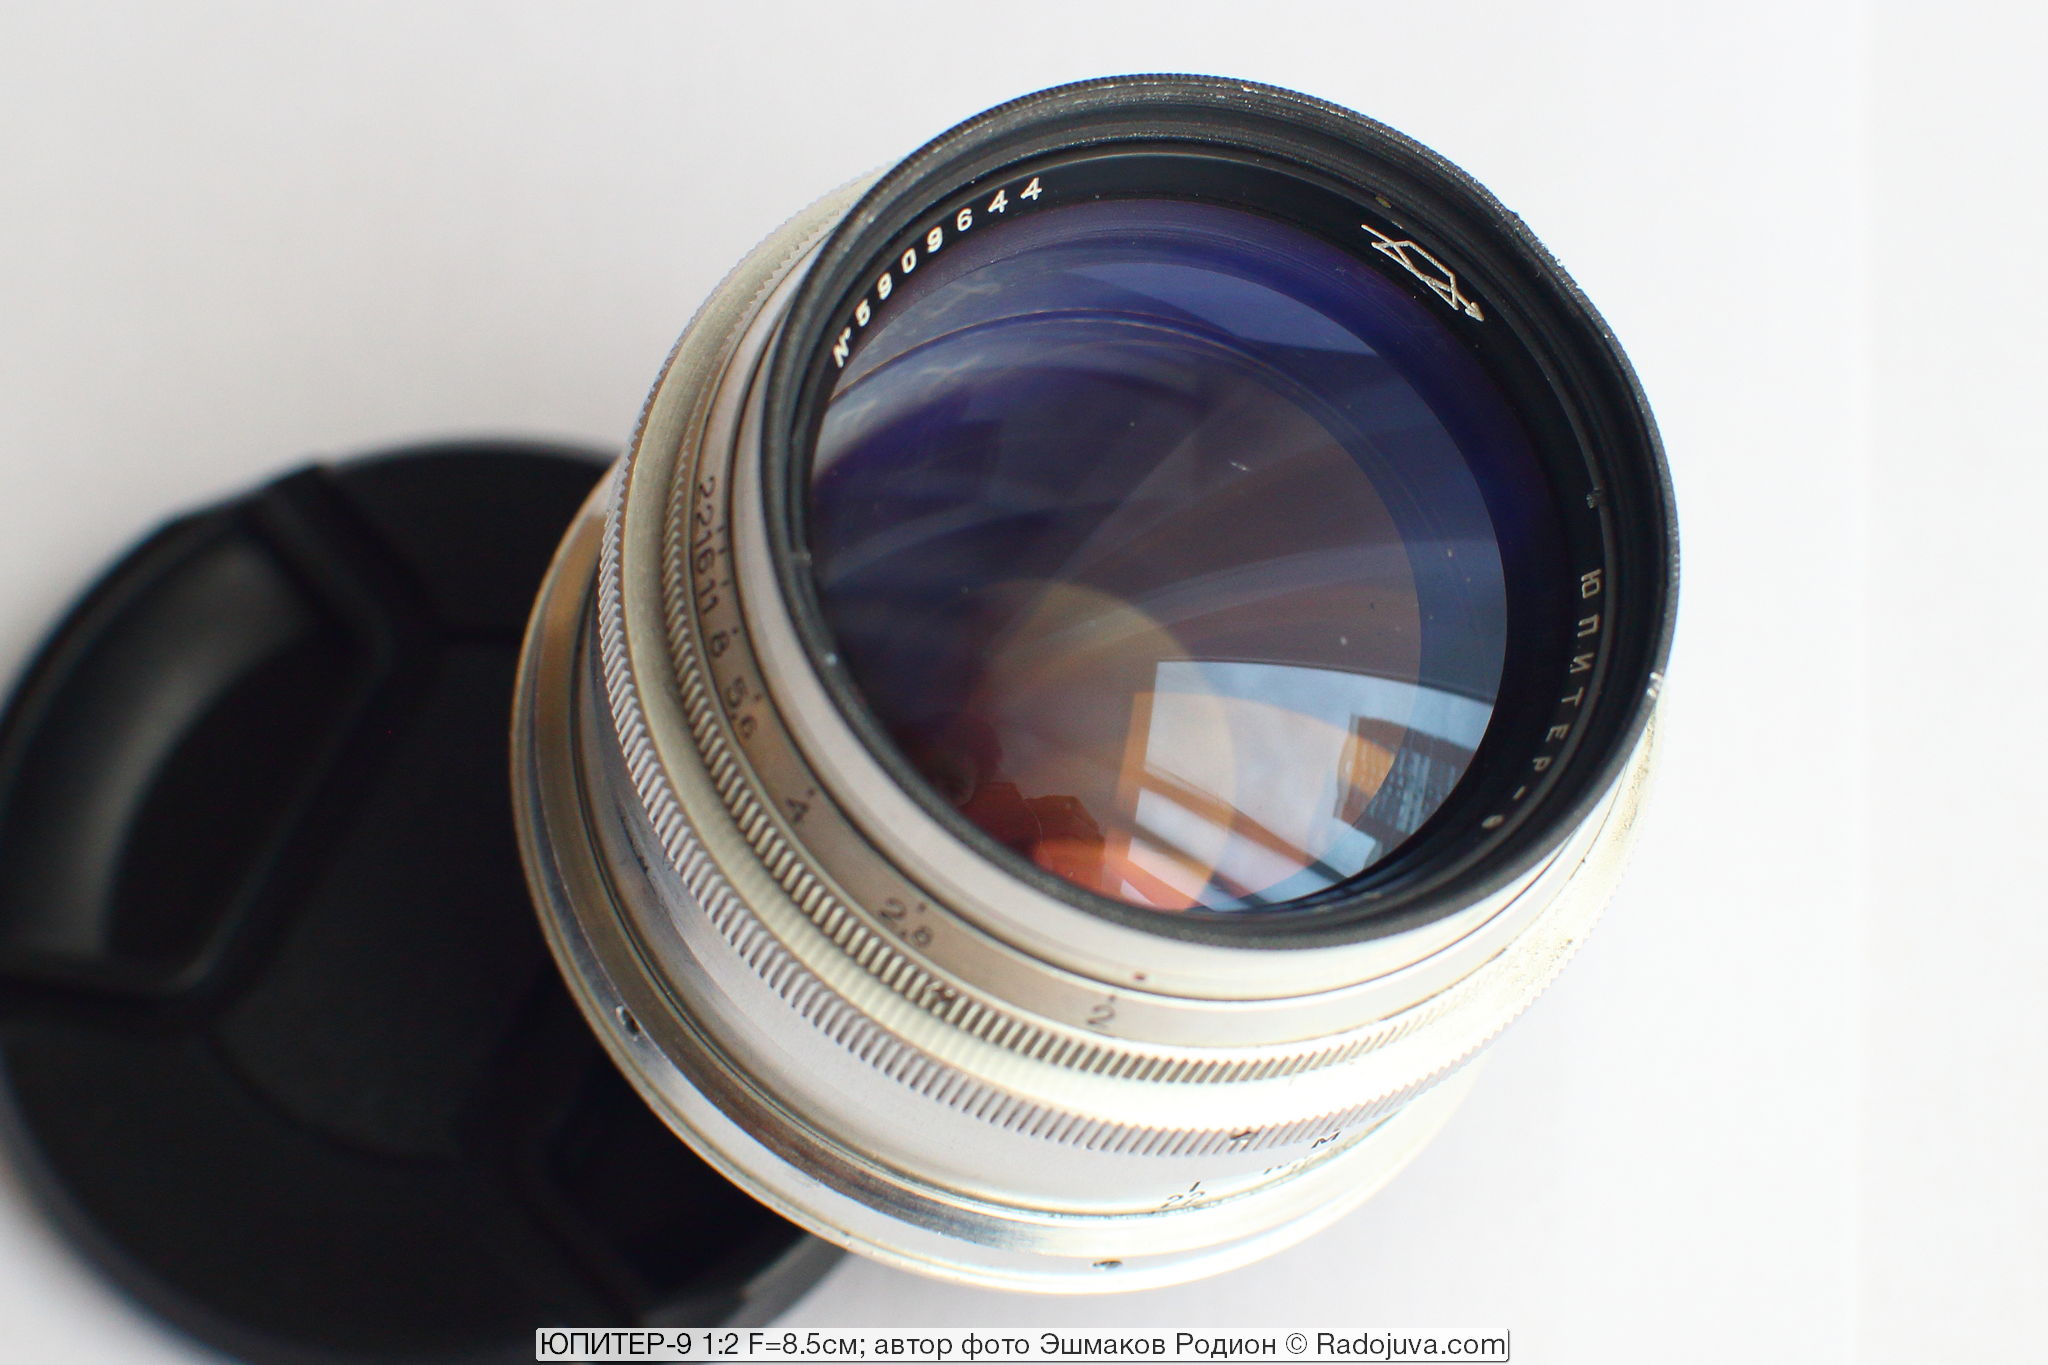 Front view of the lens